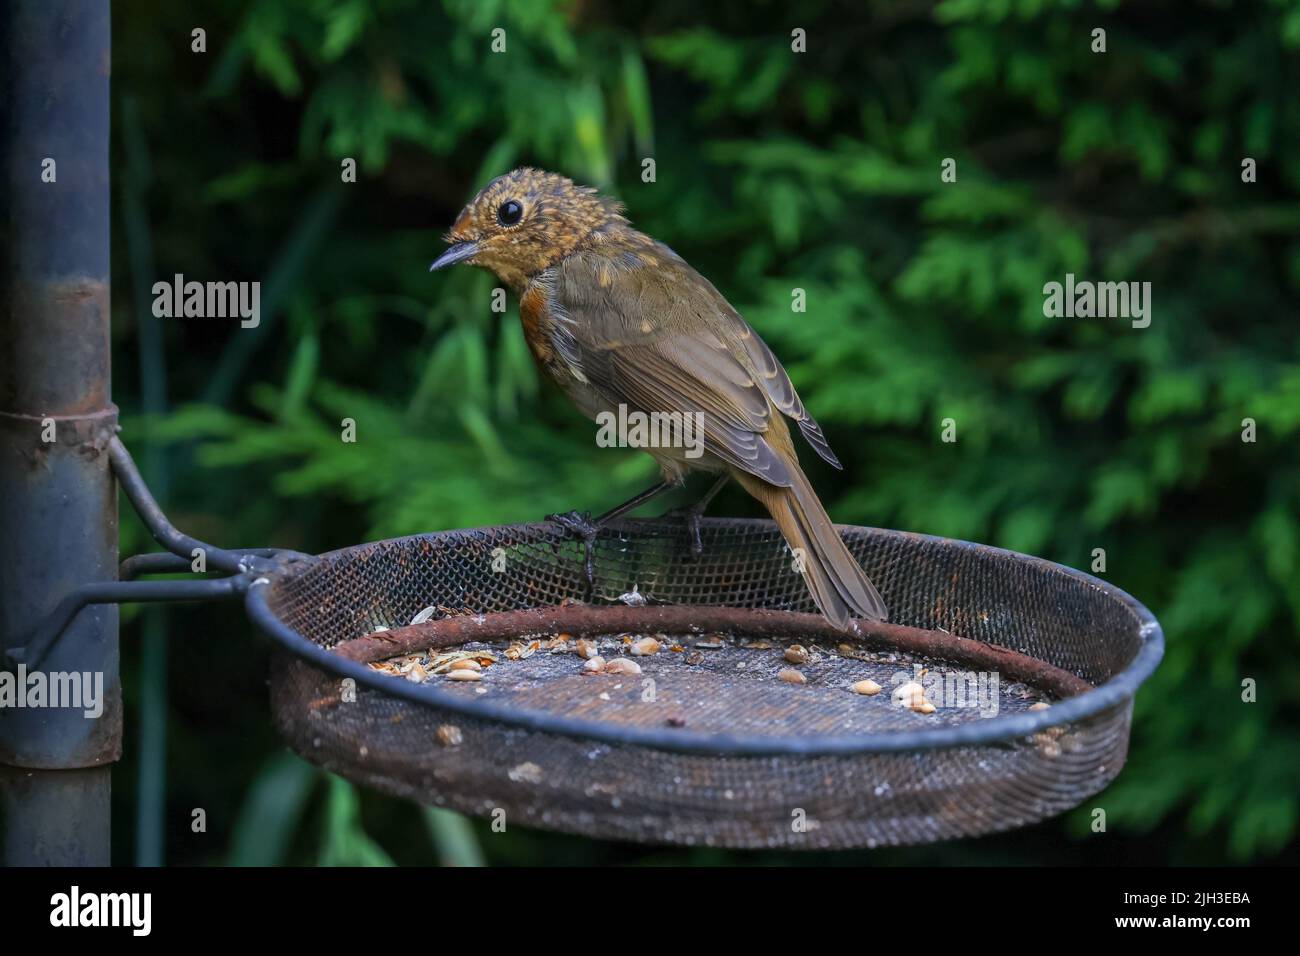 Juvenile robin bird 'Erithacus rubecula', front bib feathers turning red, perched on seed feeder in summer garden. Dublin, Ireland Stock Photo